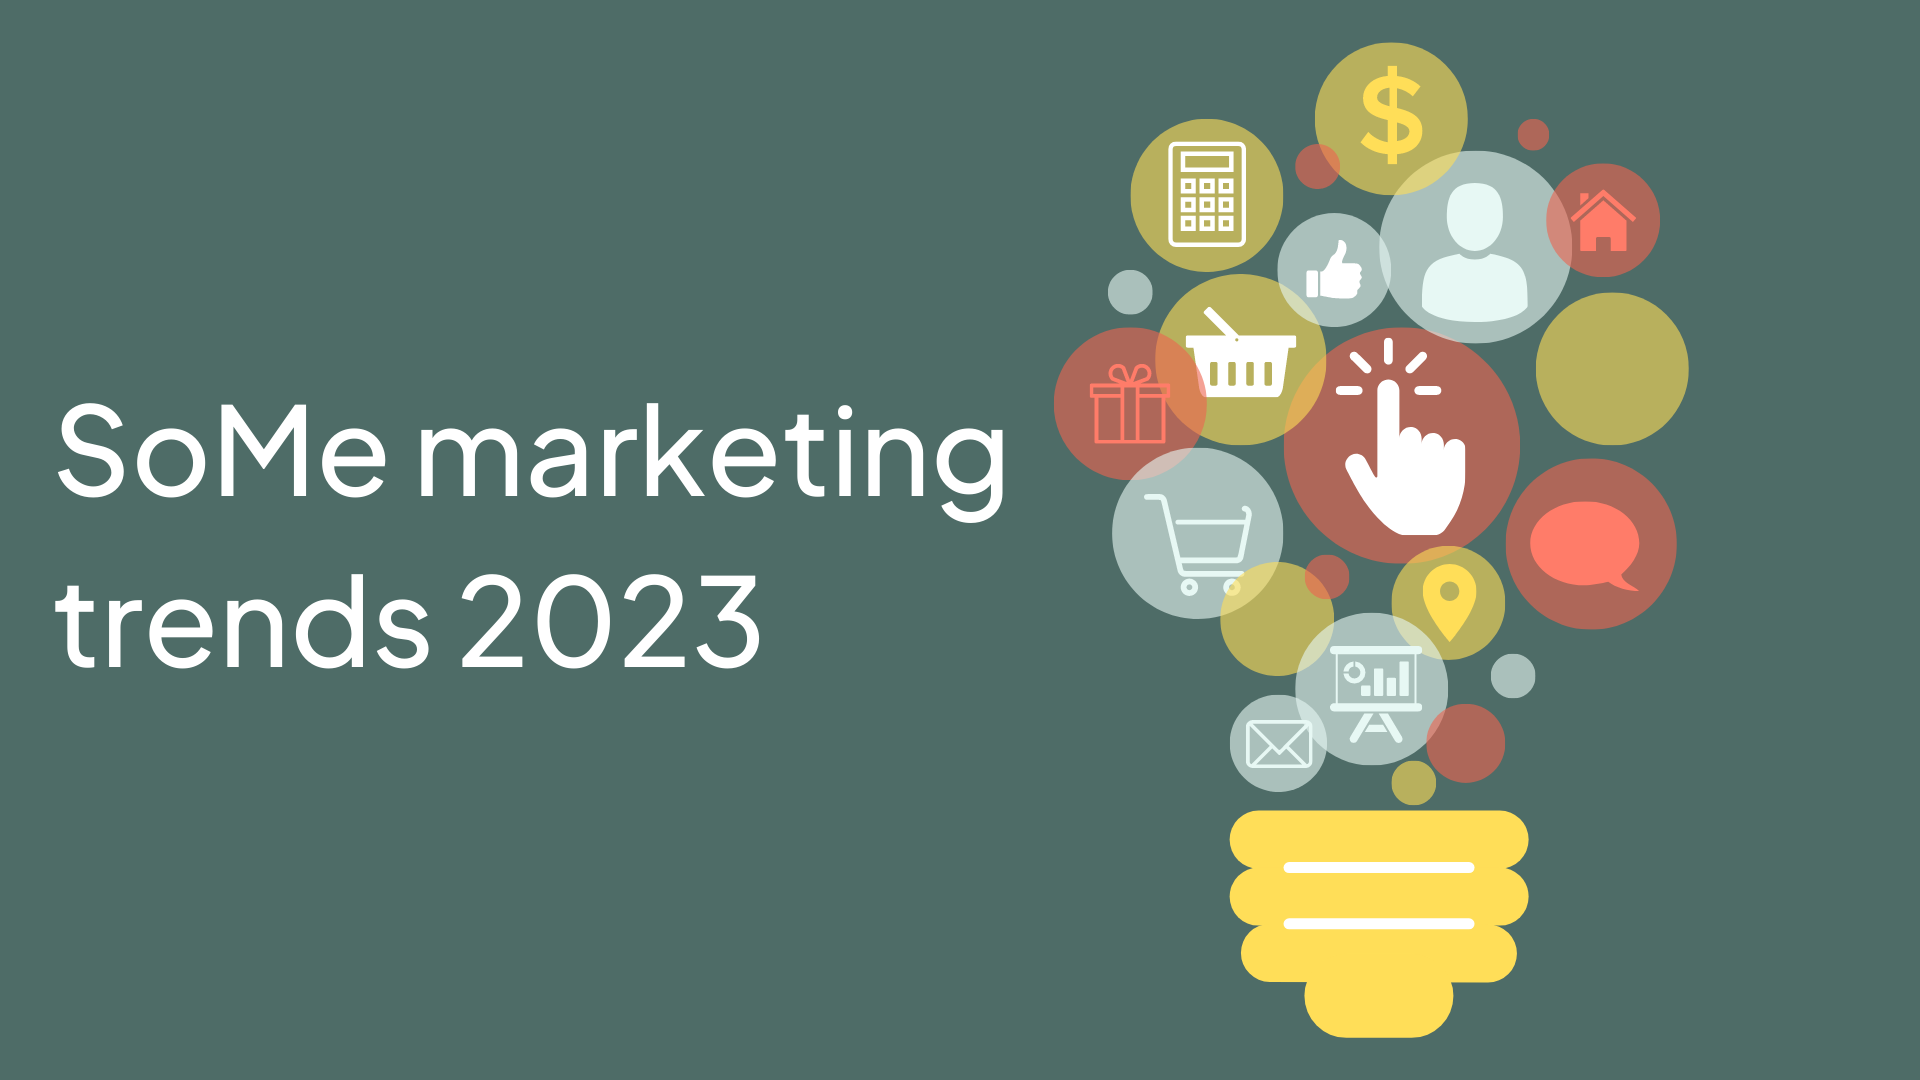 Some marketing trends 2023